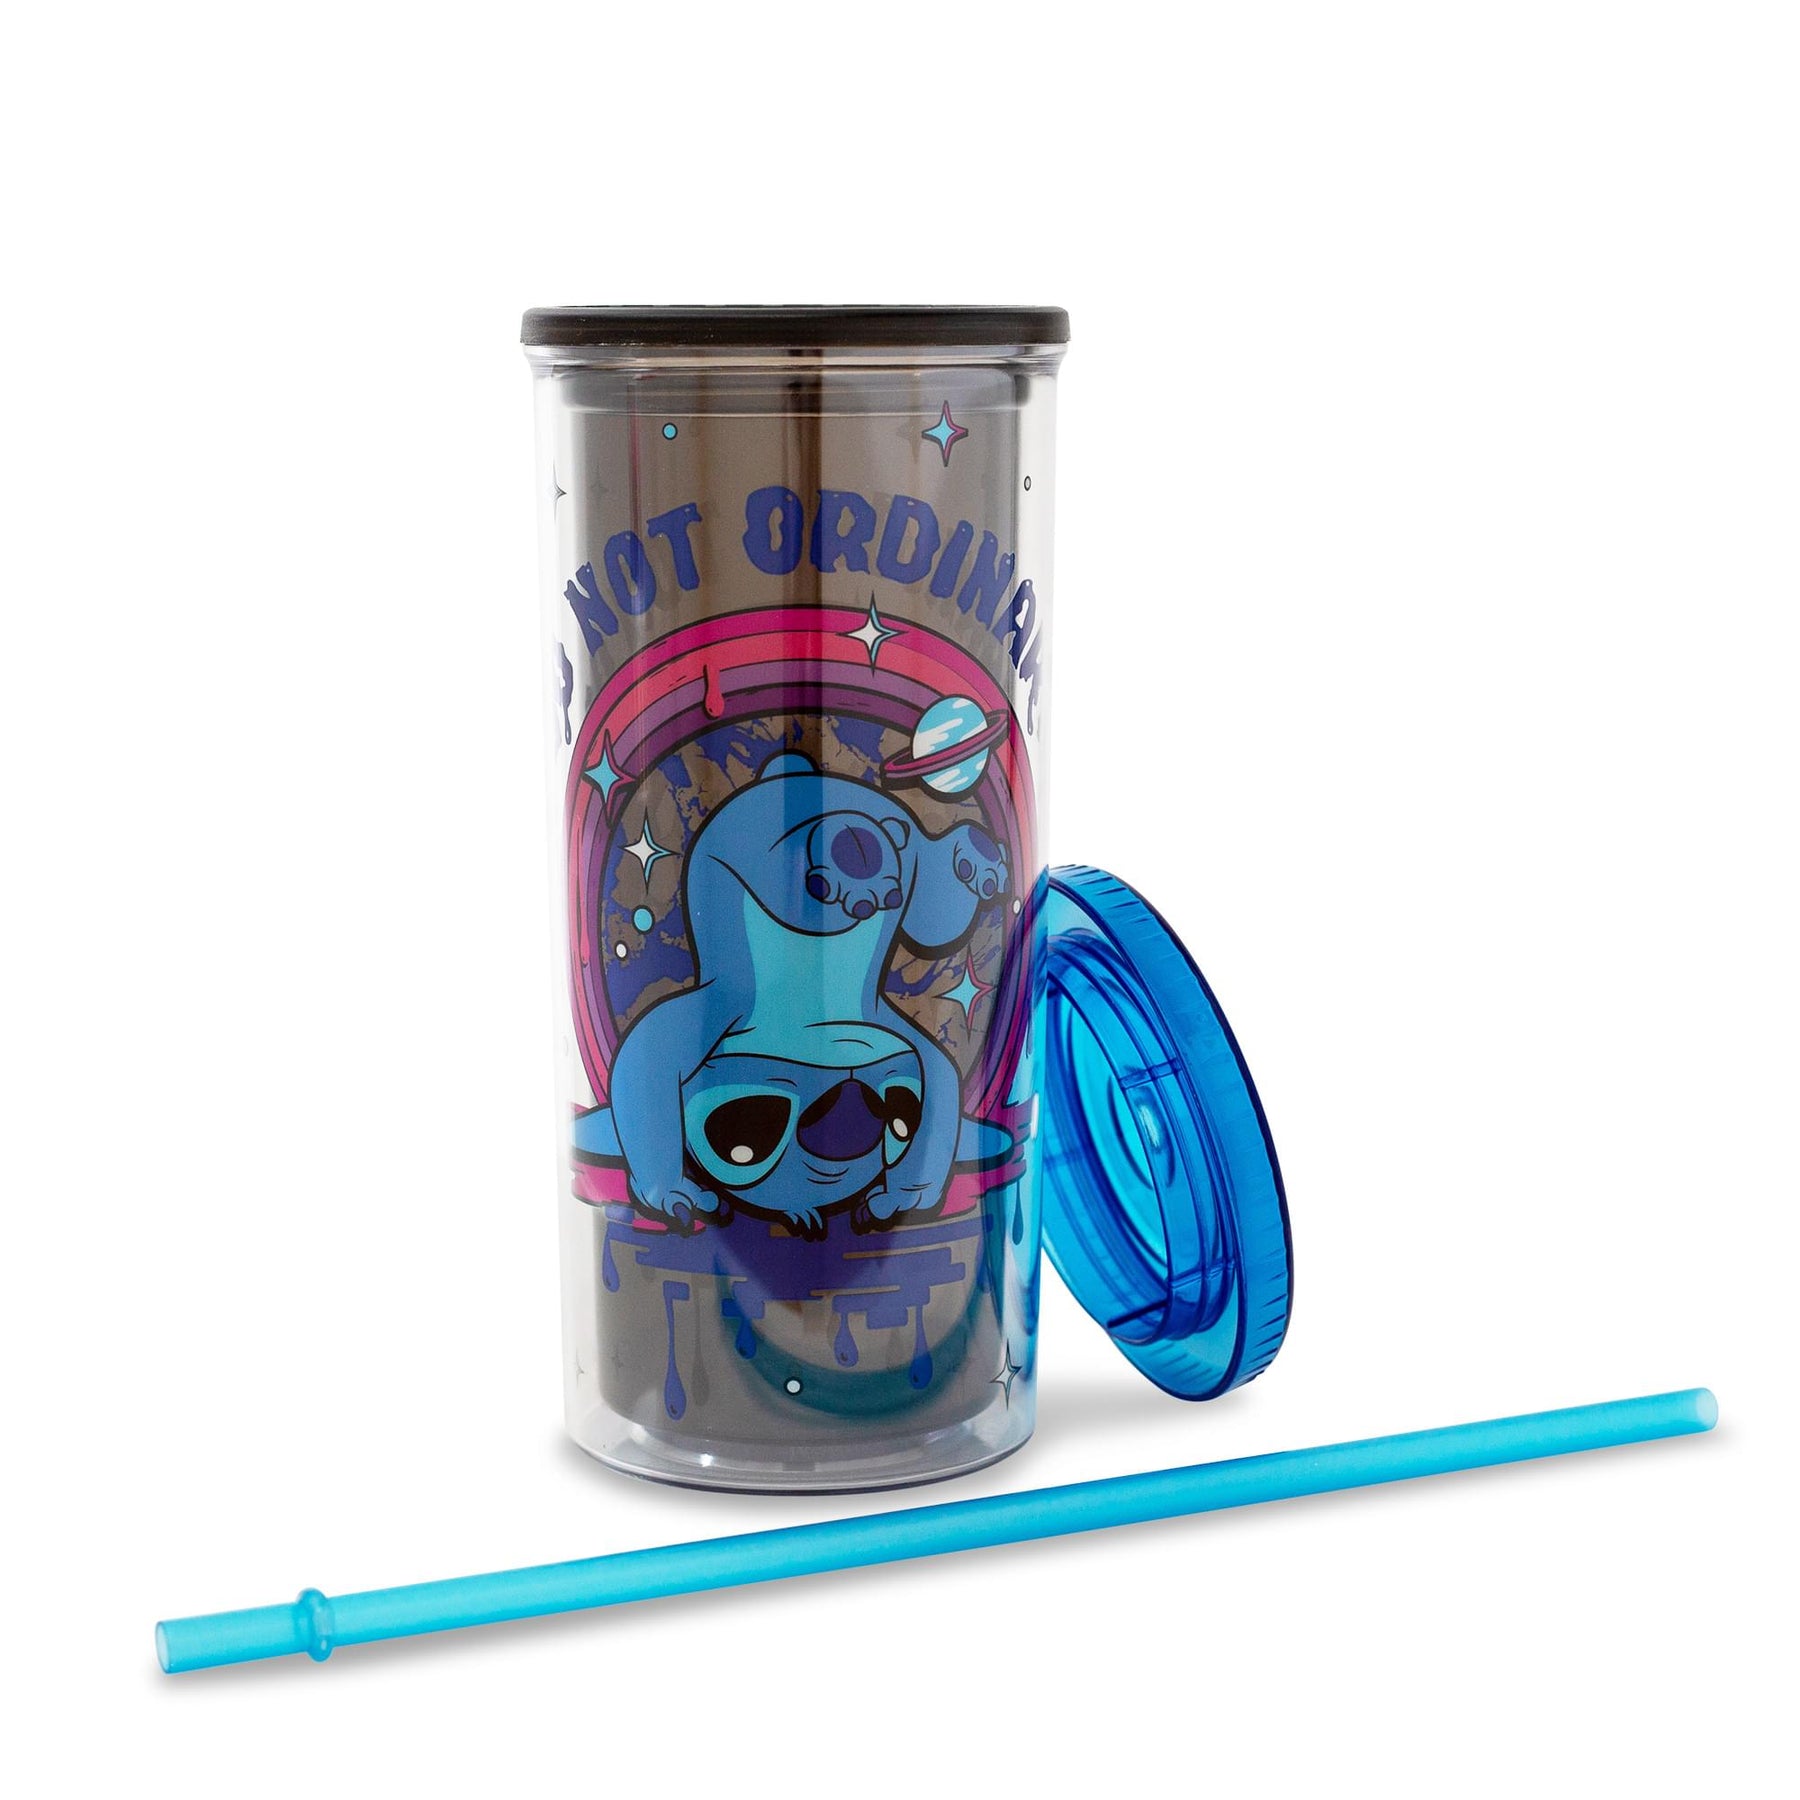 Disney Lilo & Stitch "So Not Ordinary" 20-Ounce Carnival Cup With Lid and Straw